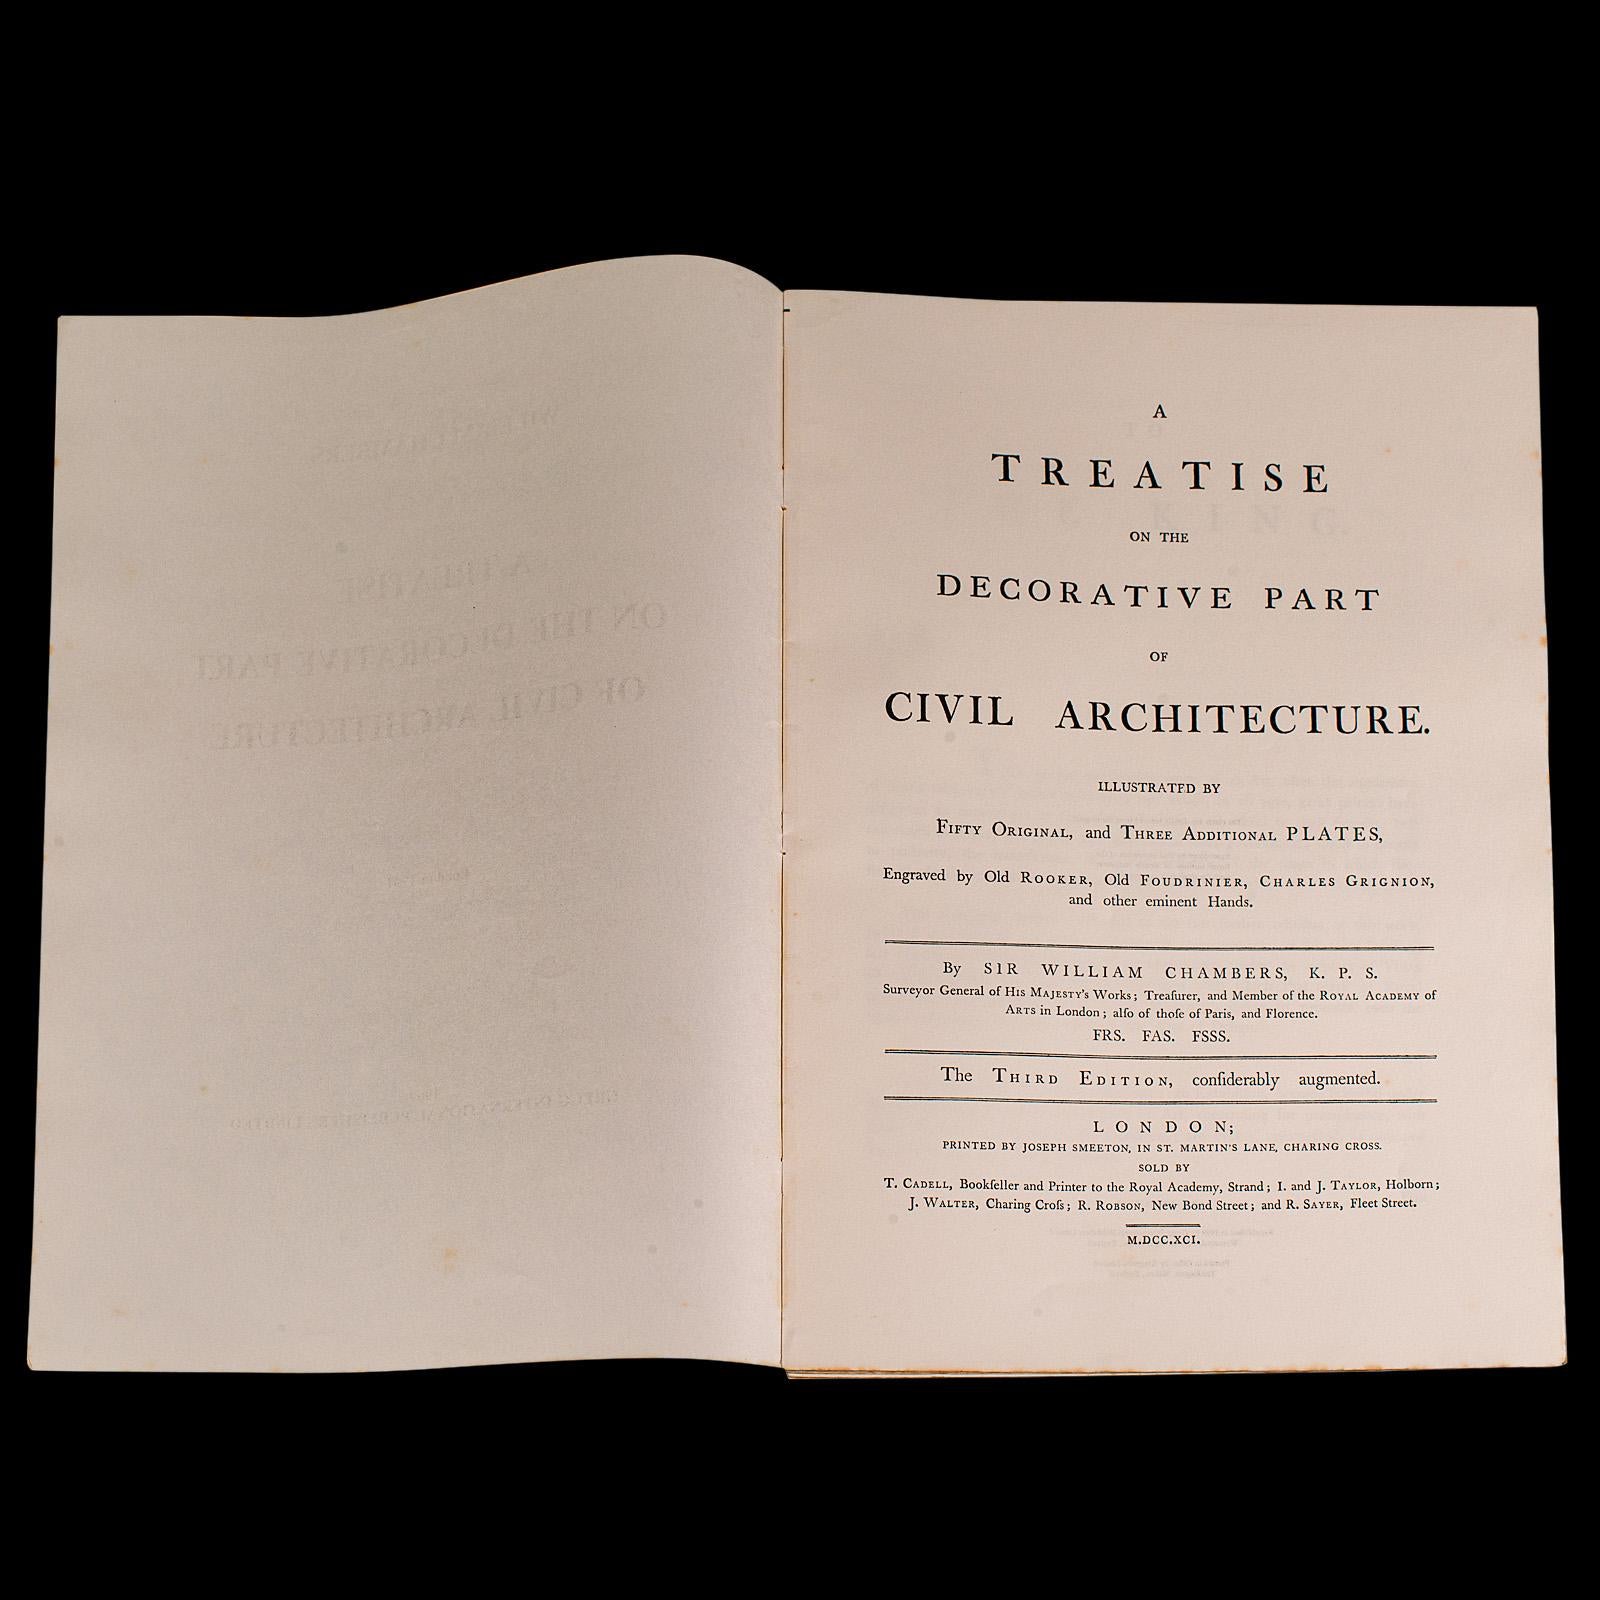 This is a vintage folio A Treatise on the Decorative Part of Civil Architecture. An unbound reproduction of the 18th century original by Sir William Chambers, printed in 1969.

Born in Sweden, Sir William Chambers (1723 - 1796) was an 18th century